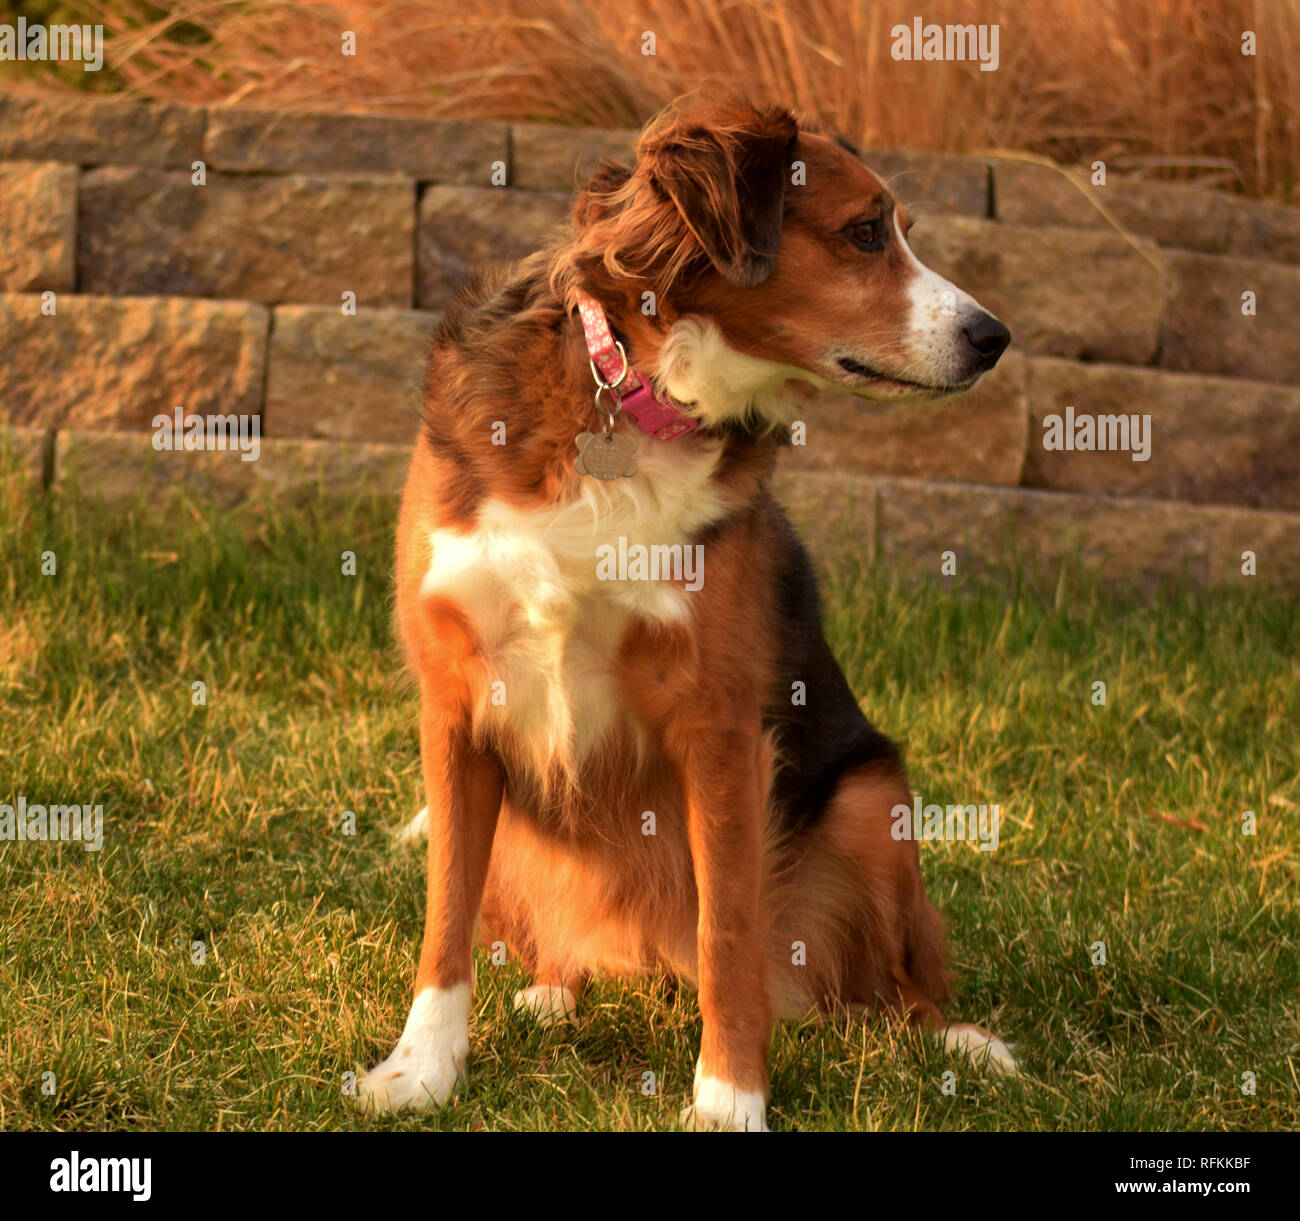 Australian shepherd border collie mix sitting in grass on a sunny day Stock Photo -